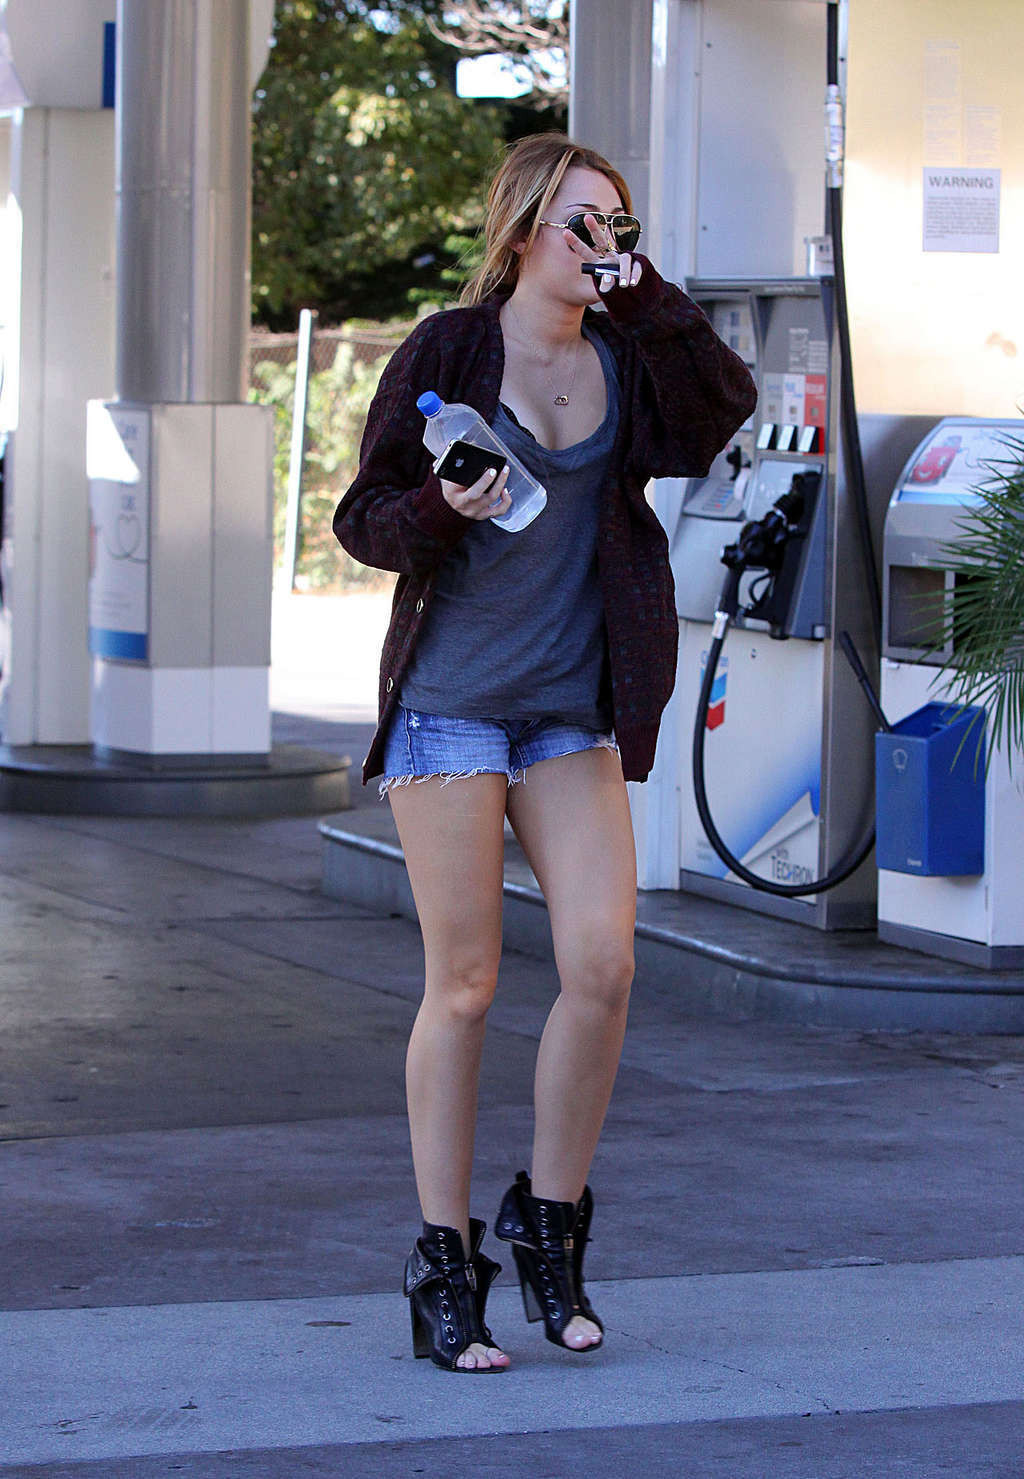 Miley Cyrus exposing her hot body and sexy legs in short shorts #75333019